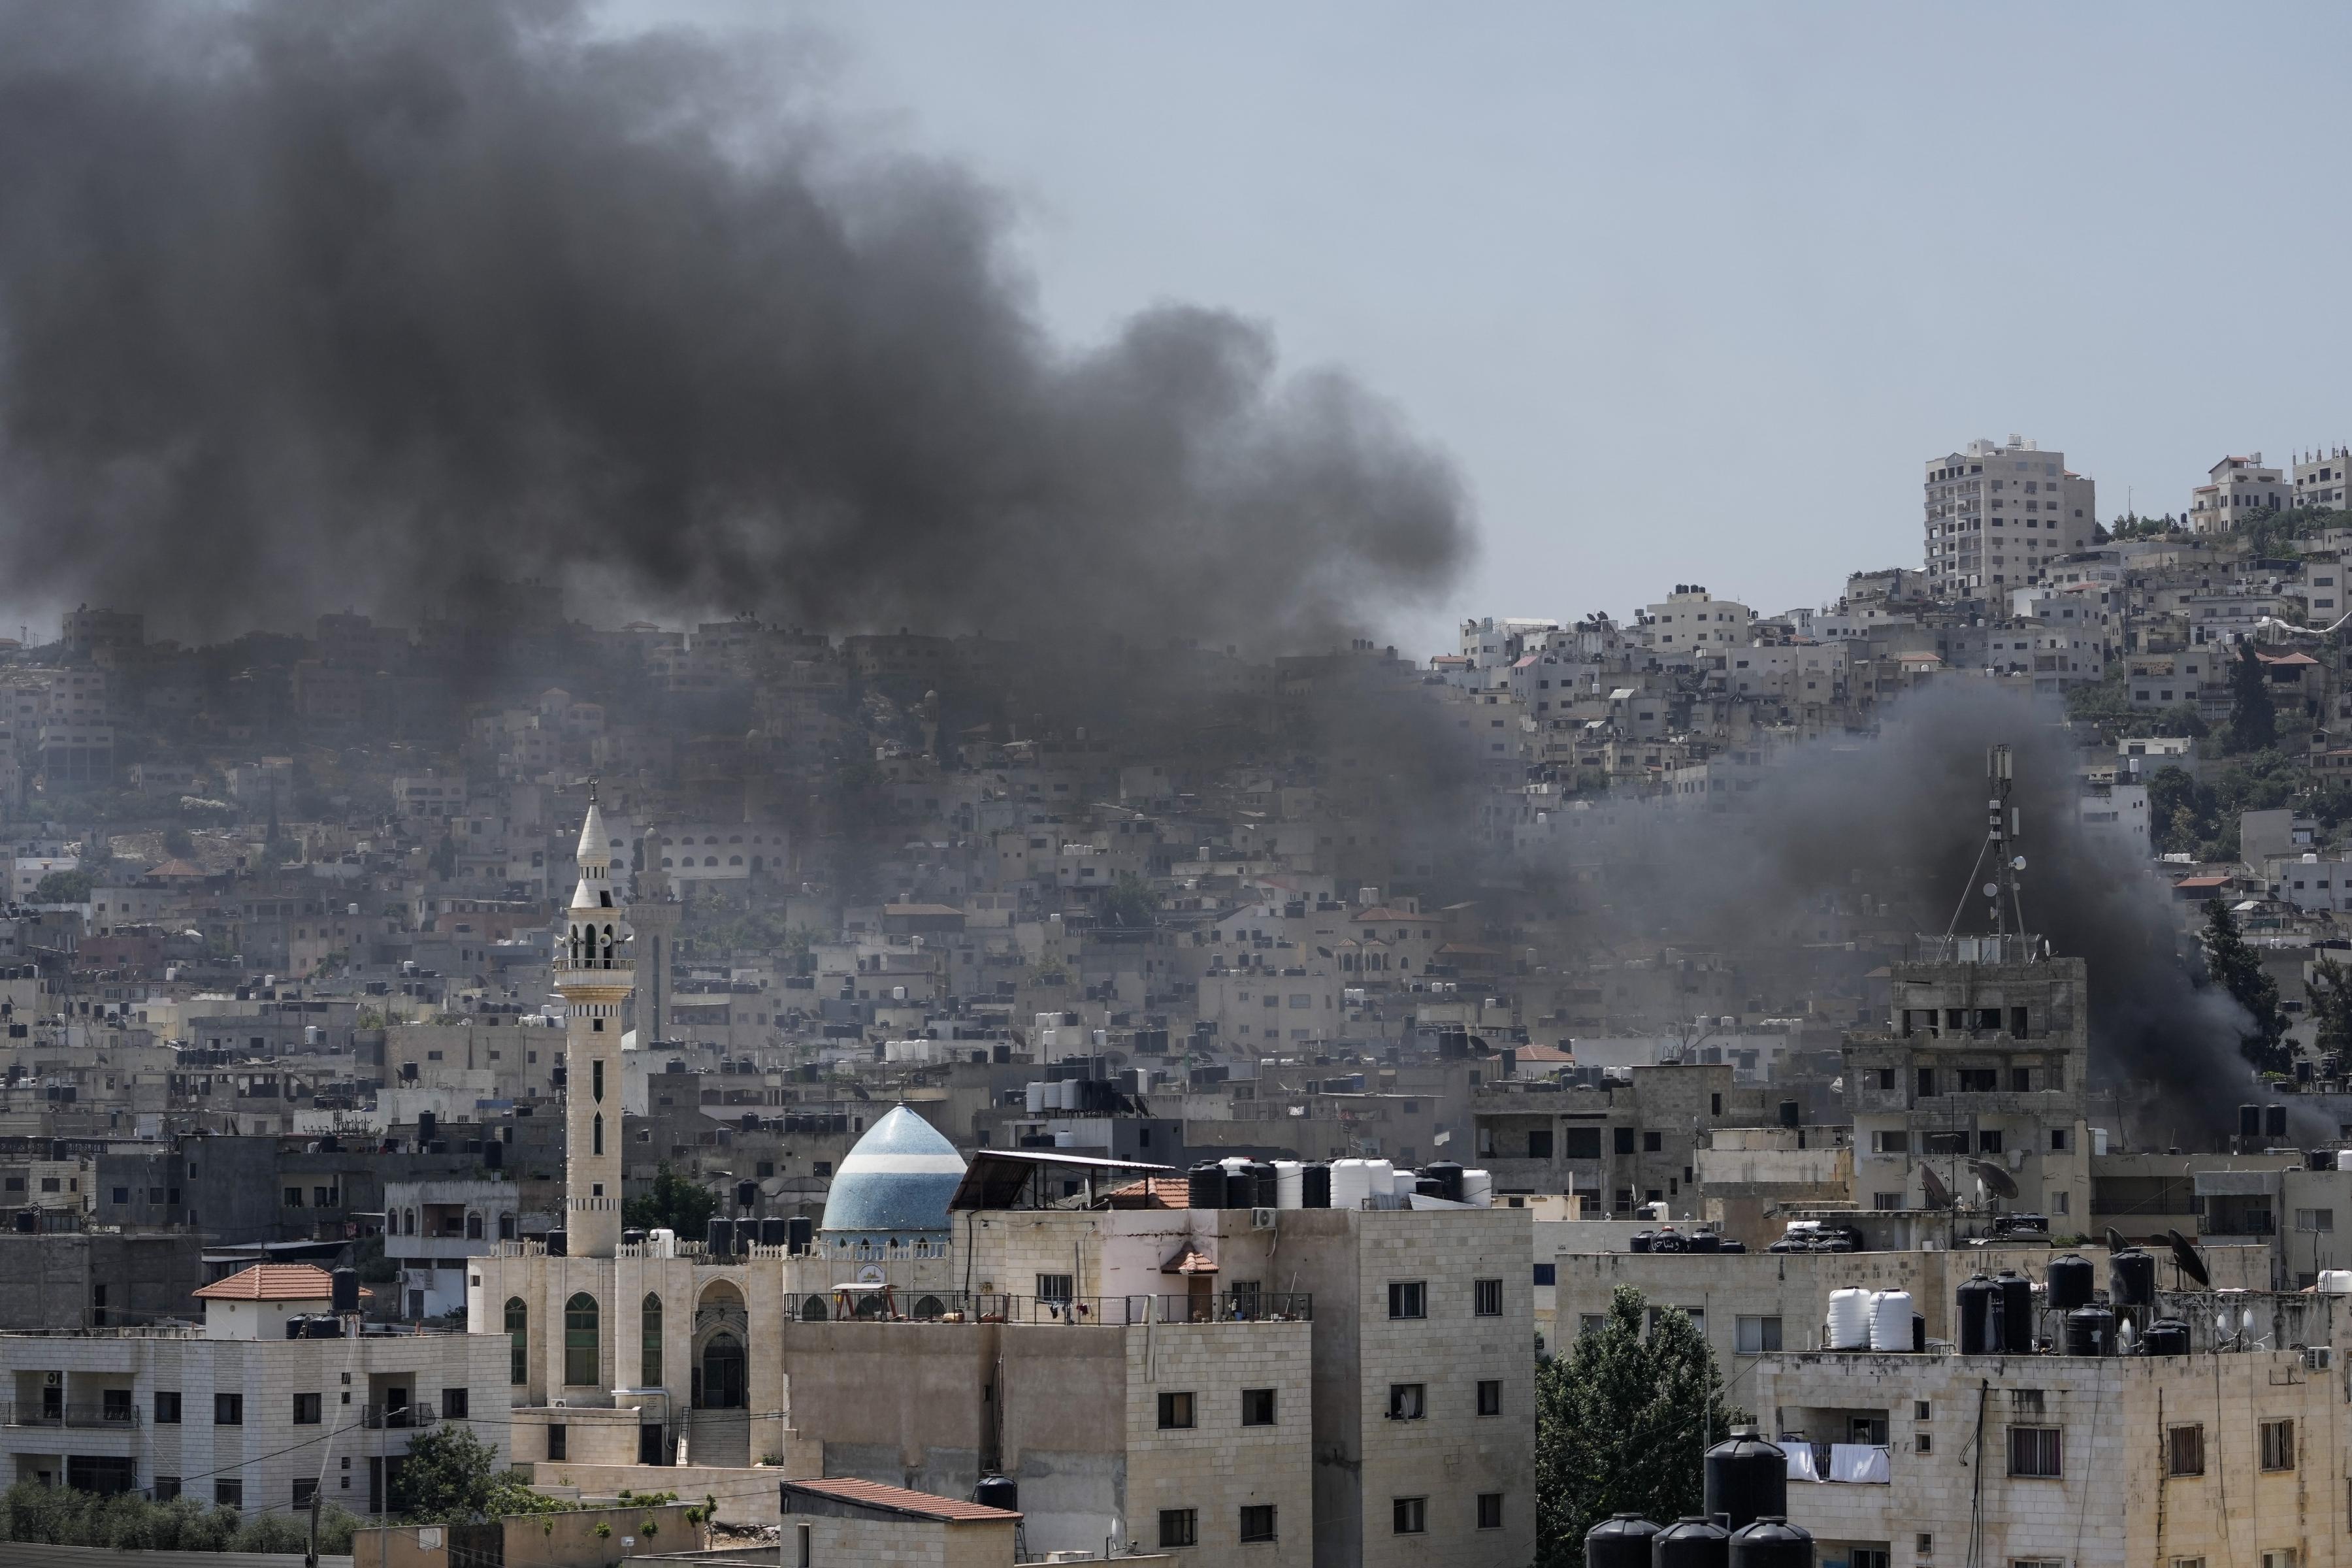 Smoke rises from a densely occupied area of homes in Jenin during Israeli assault on Jenin